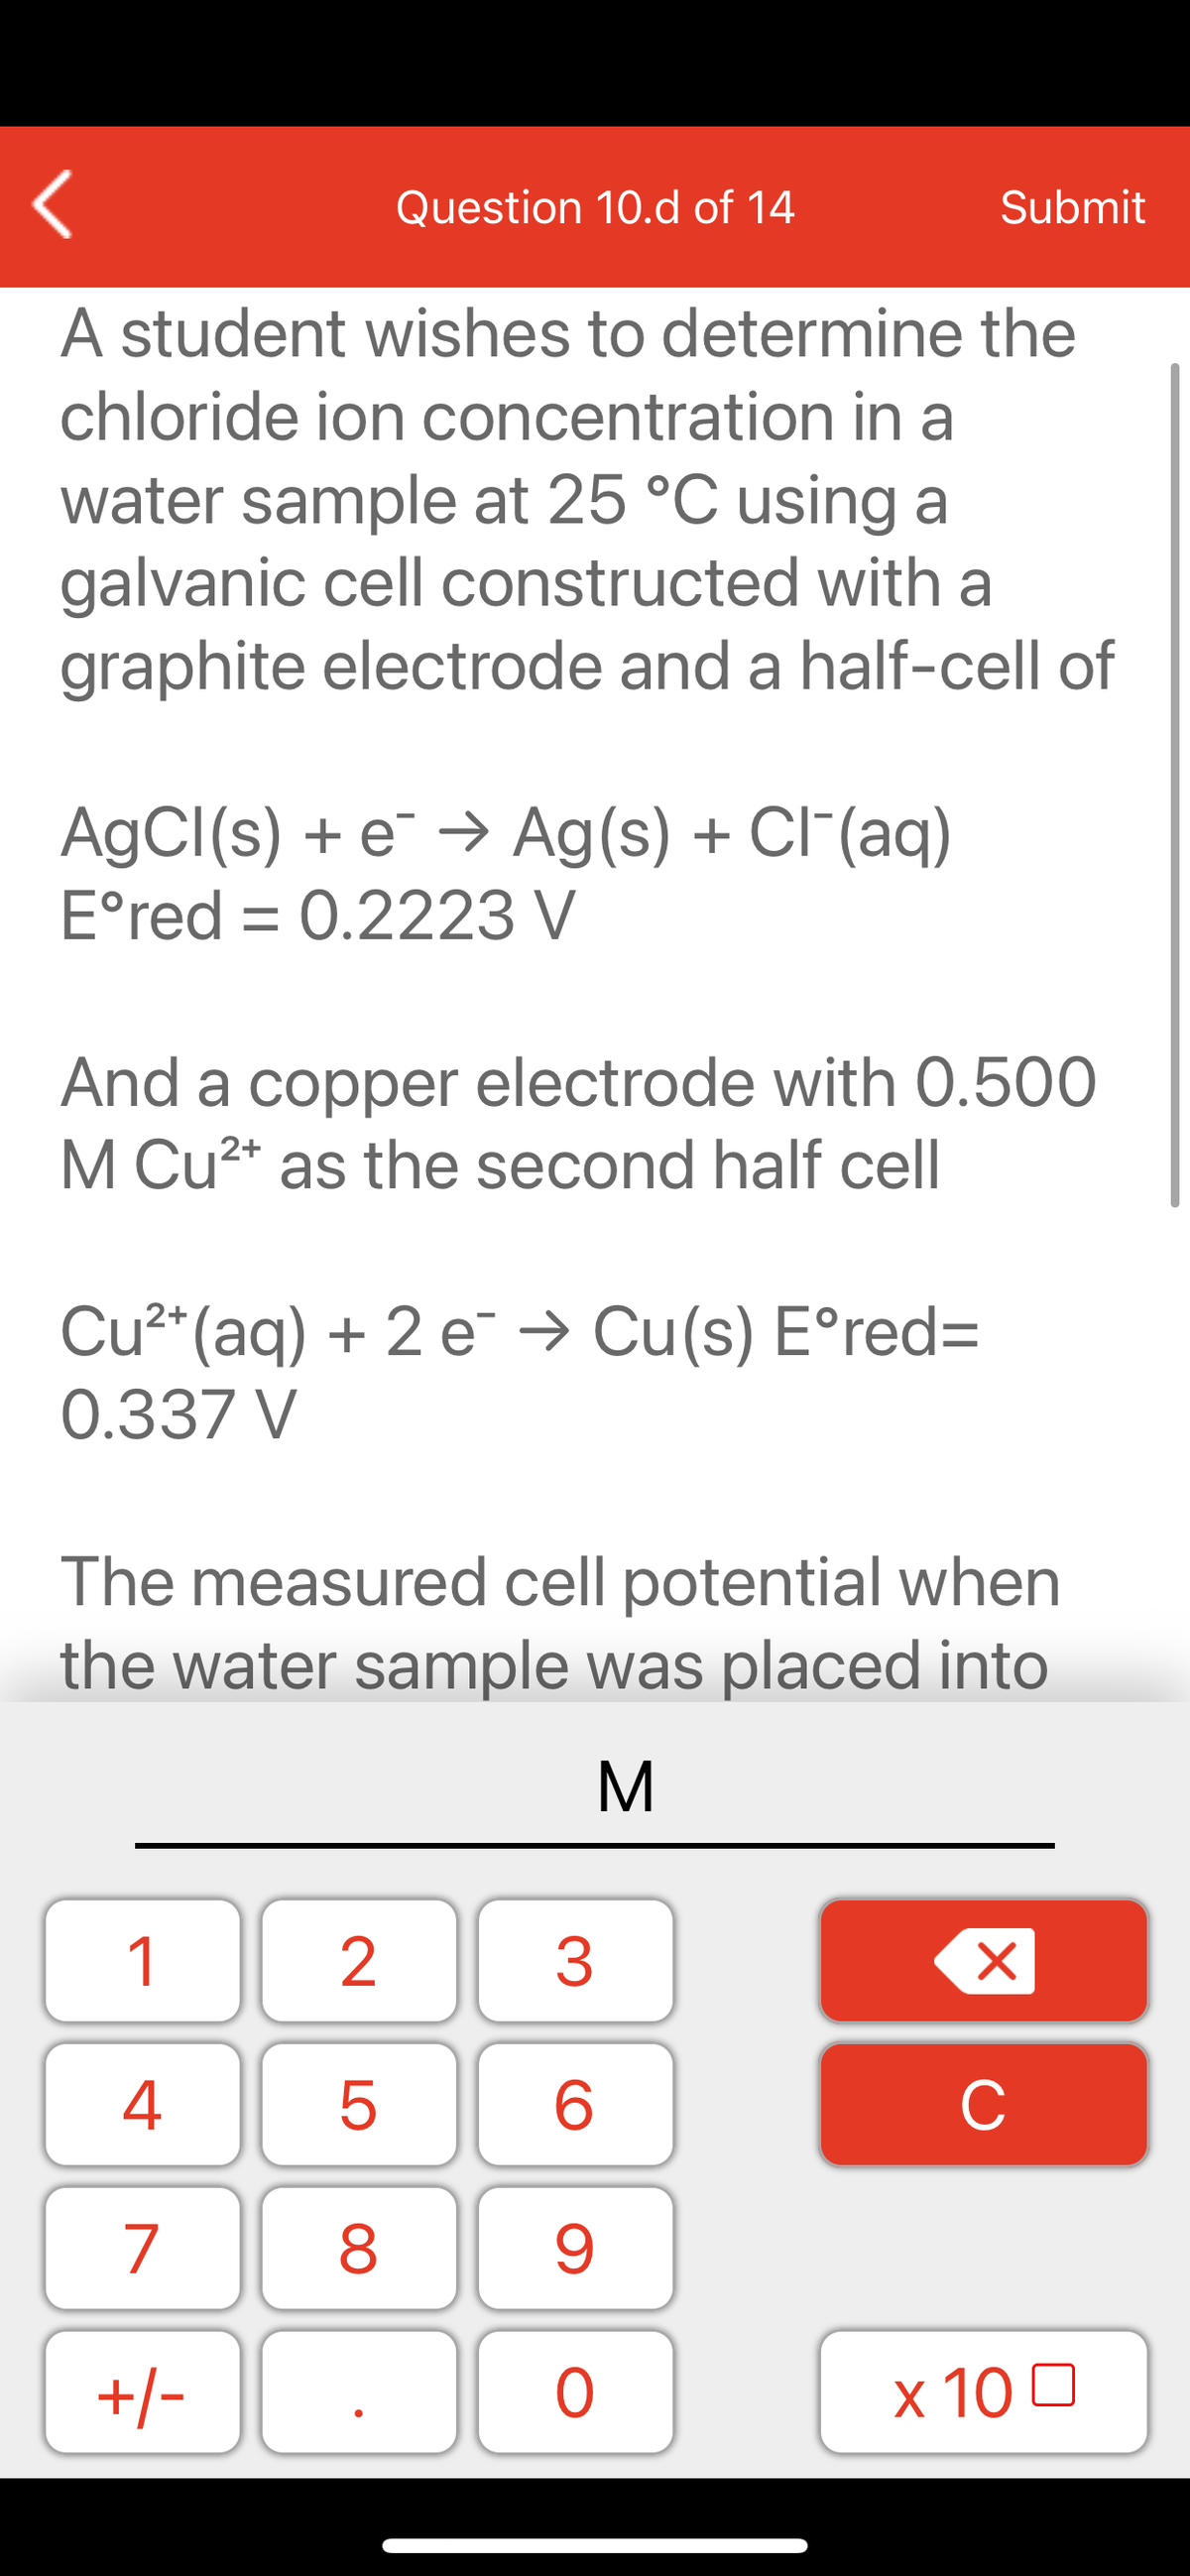 Question 10.d of 14
Submit
A student wishes to determine the
chloride ion concentration in a
water sample at 25 °C using a
galvanic cell constructed with a
graphite electrode and a half-cell of
AGCI(s) + e¯ → Ag(s) + Cl"(aq)
E°red = 0.2223 V
And a copper electrode with 0.500
M Cu2* as the second half cell
Cu²*(aq) + 2 e → Cu(s) E°red=
0.337 V
The measured cell potential when
the water sample was placed into
M
1
2
3
C
7
9.
+/-
x 10 0
LO
00
